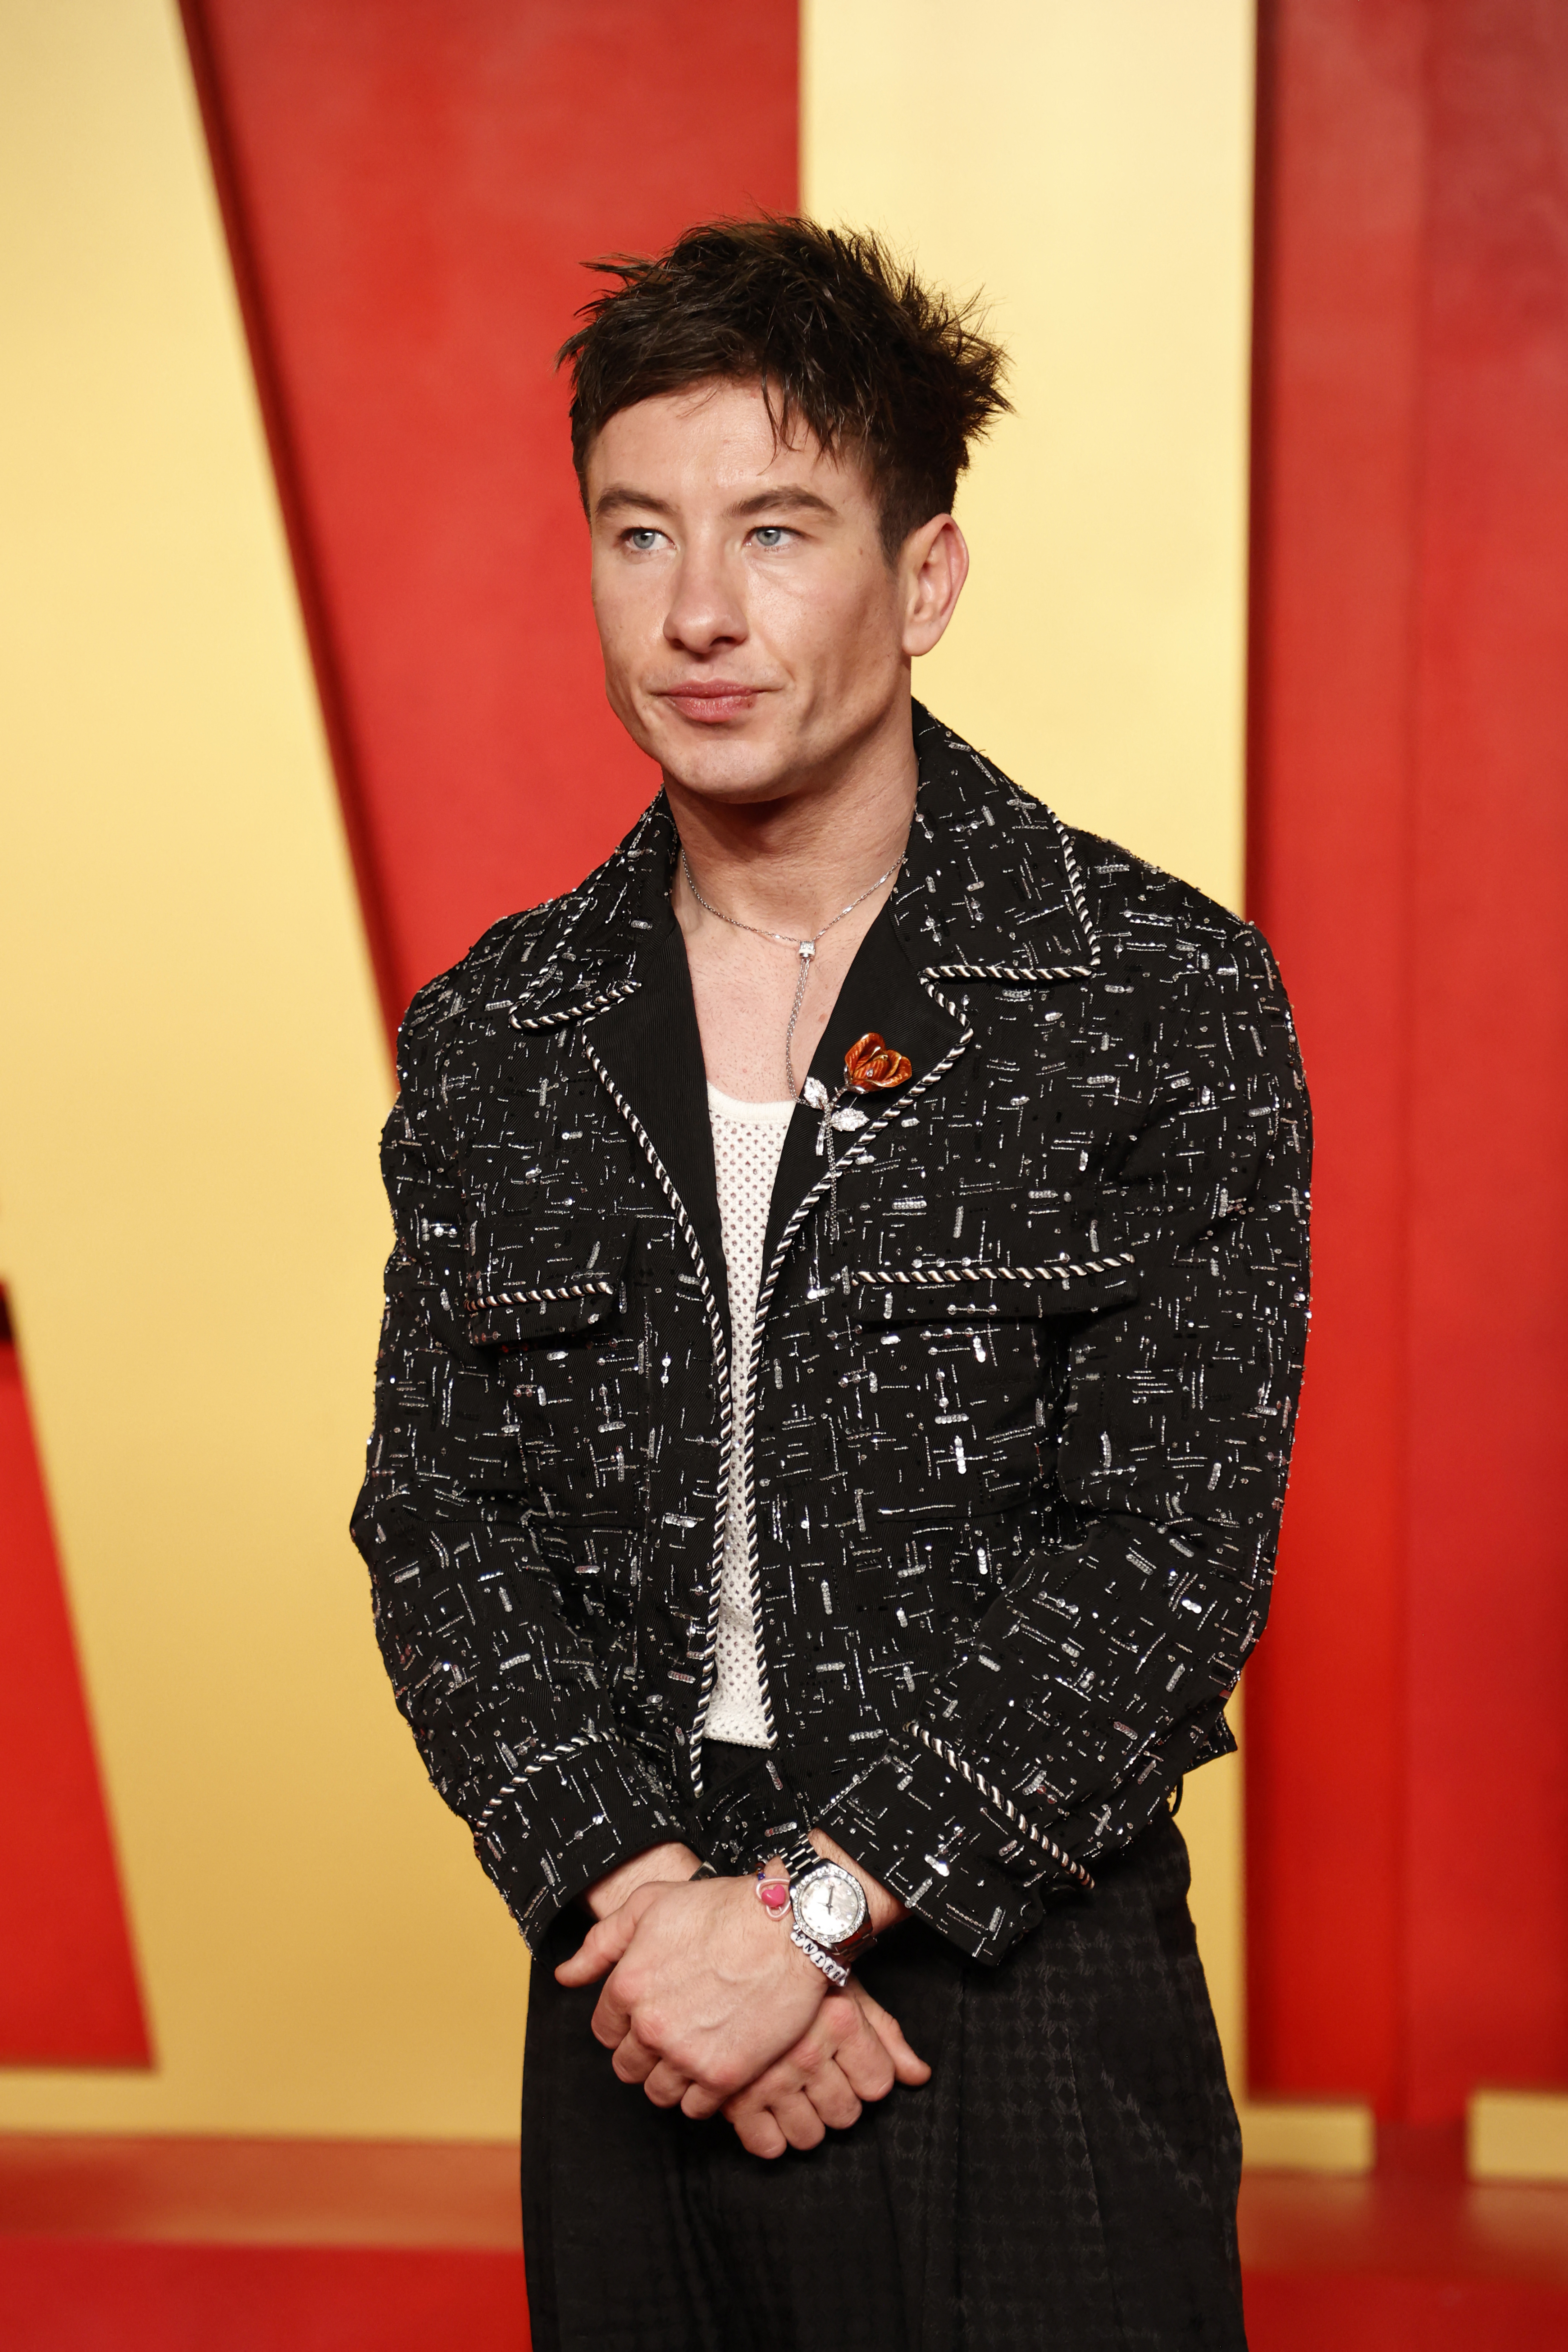 Barry Keoghan at an event wearing a patterned jacket with a red poppy pin and a watch, hands clasped in front